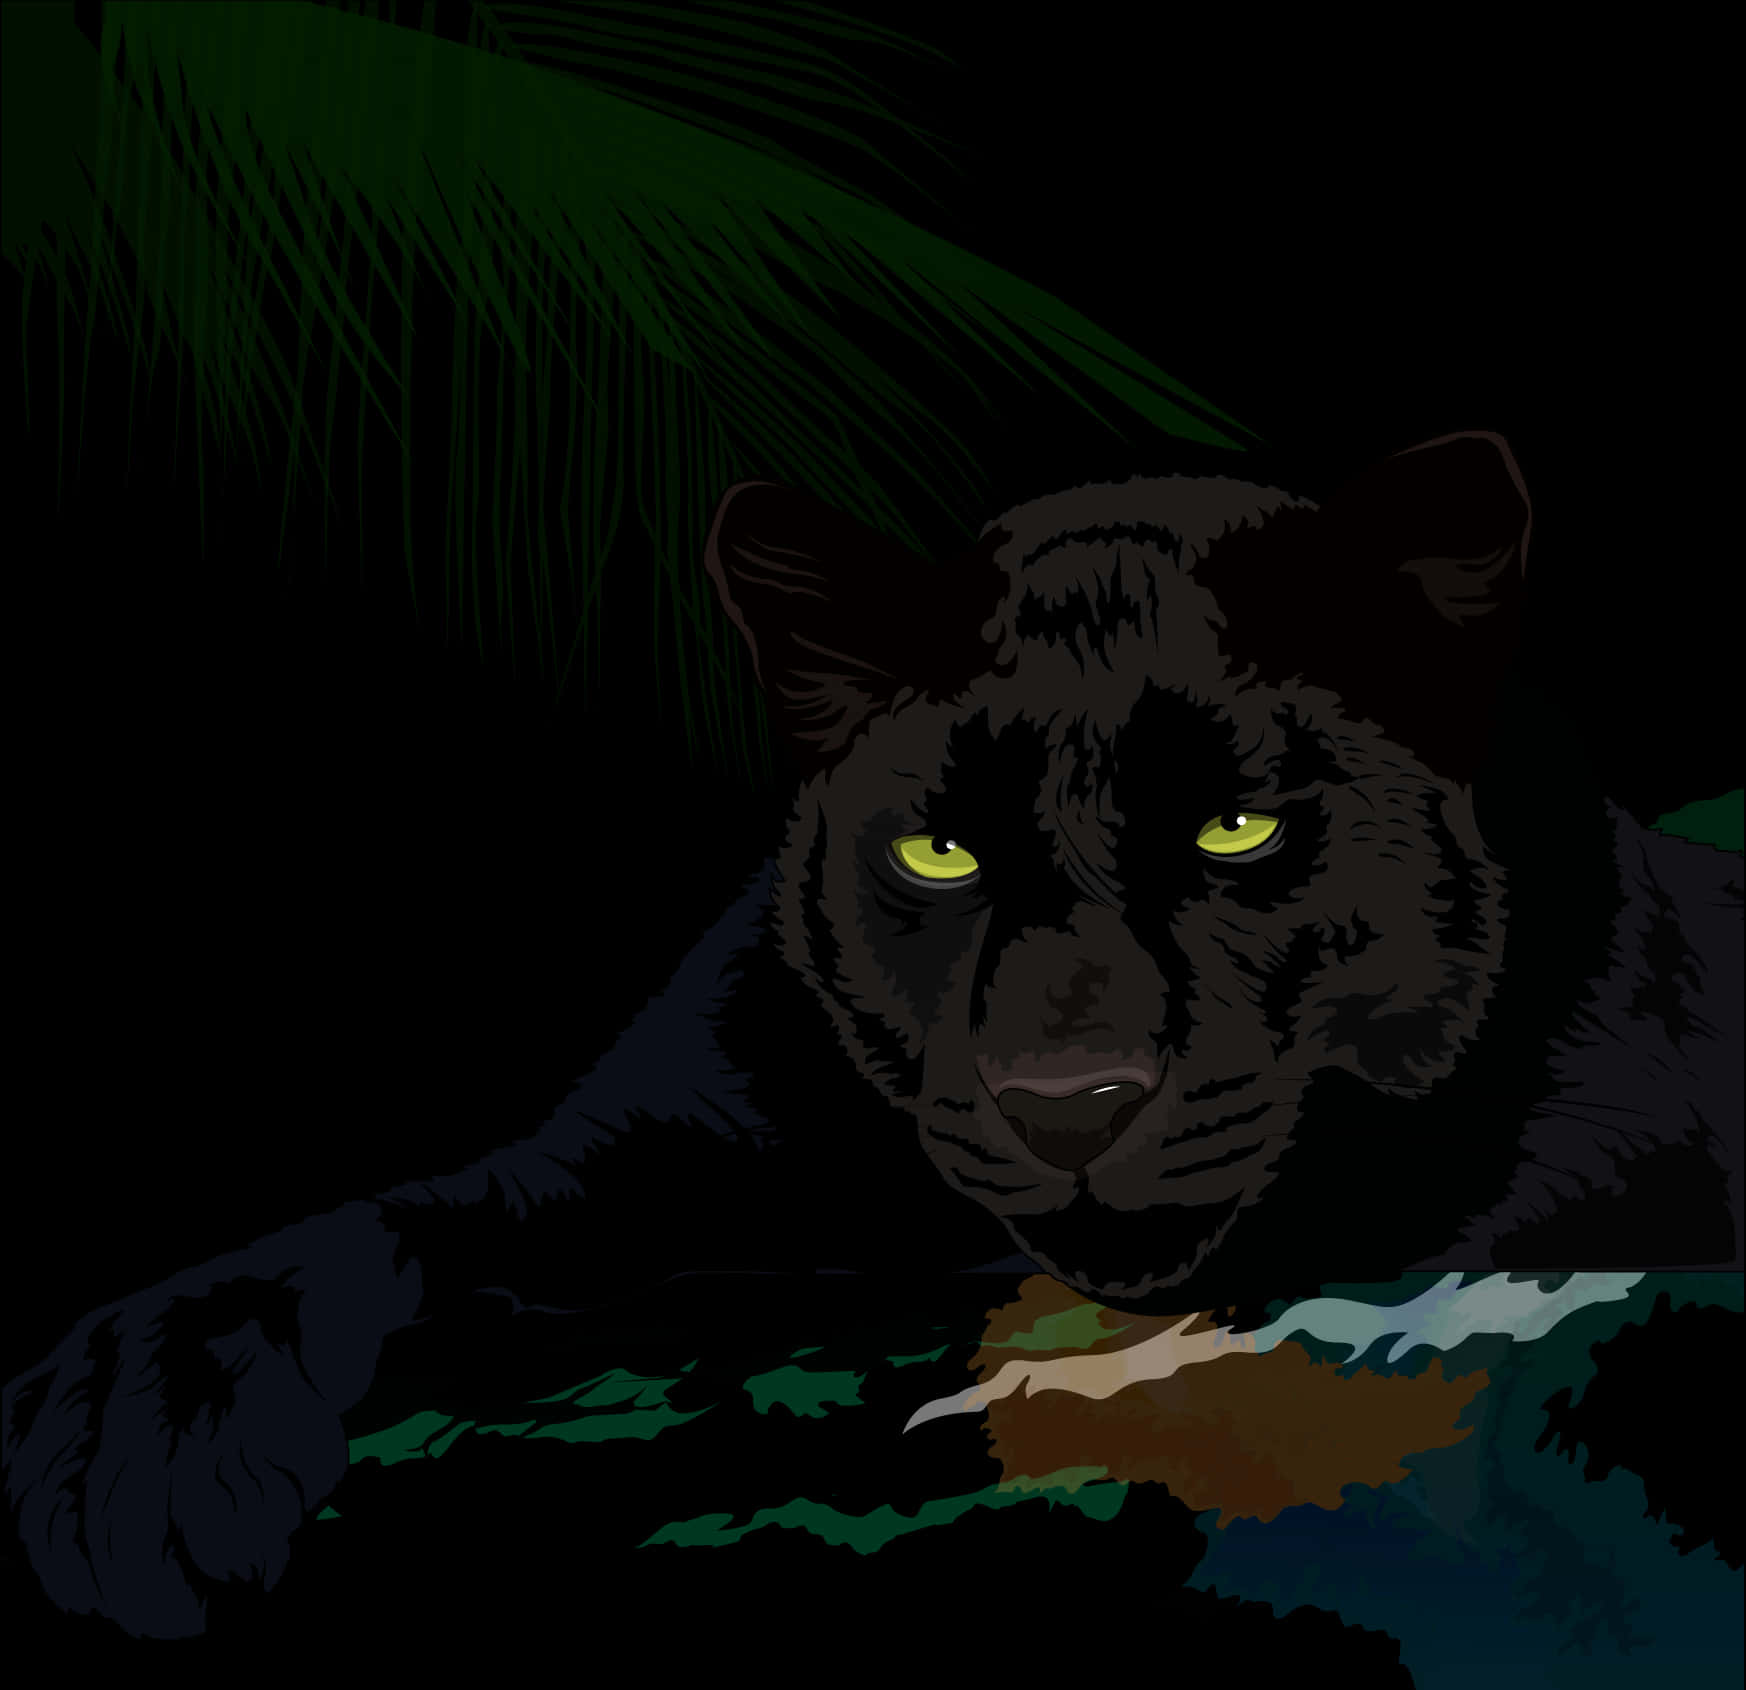 A Black Panther With Green Eyes